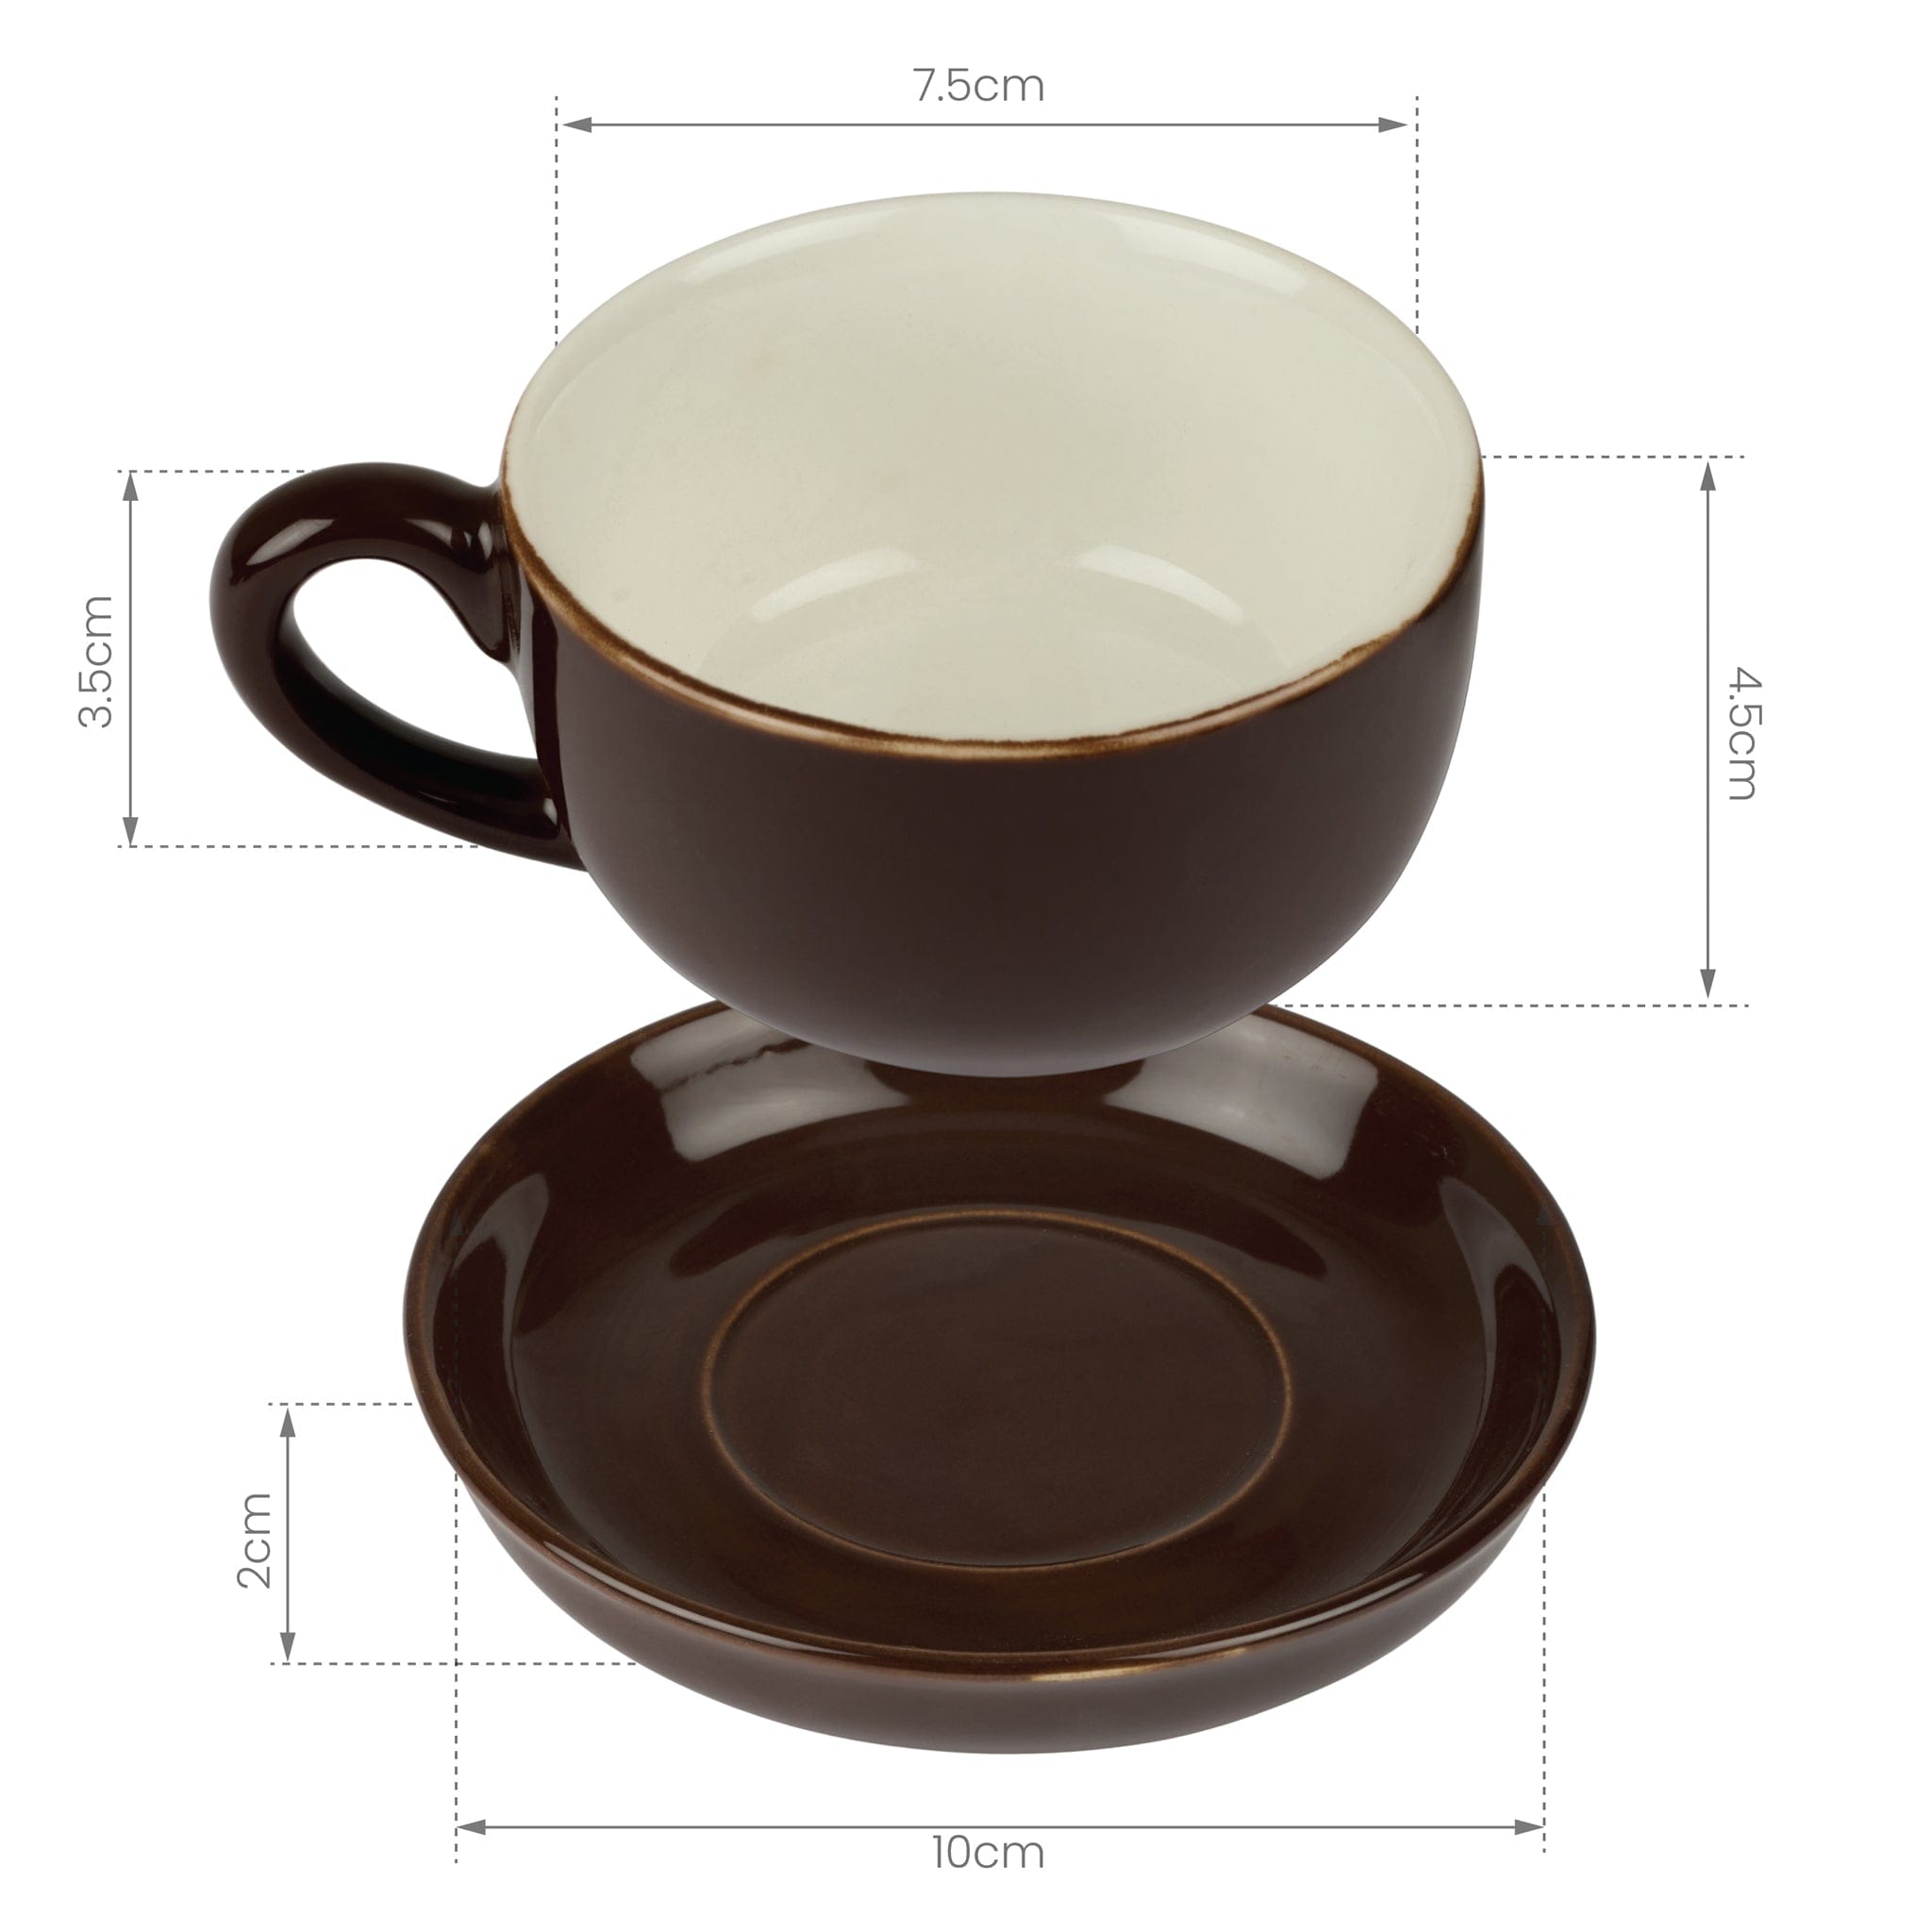 6 Espresso Cup and Saucer Set - Brown only5pounds-com